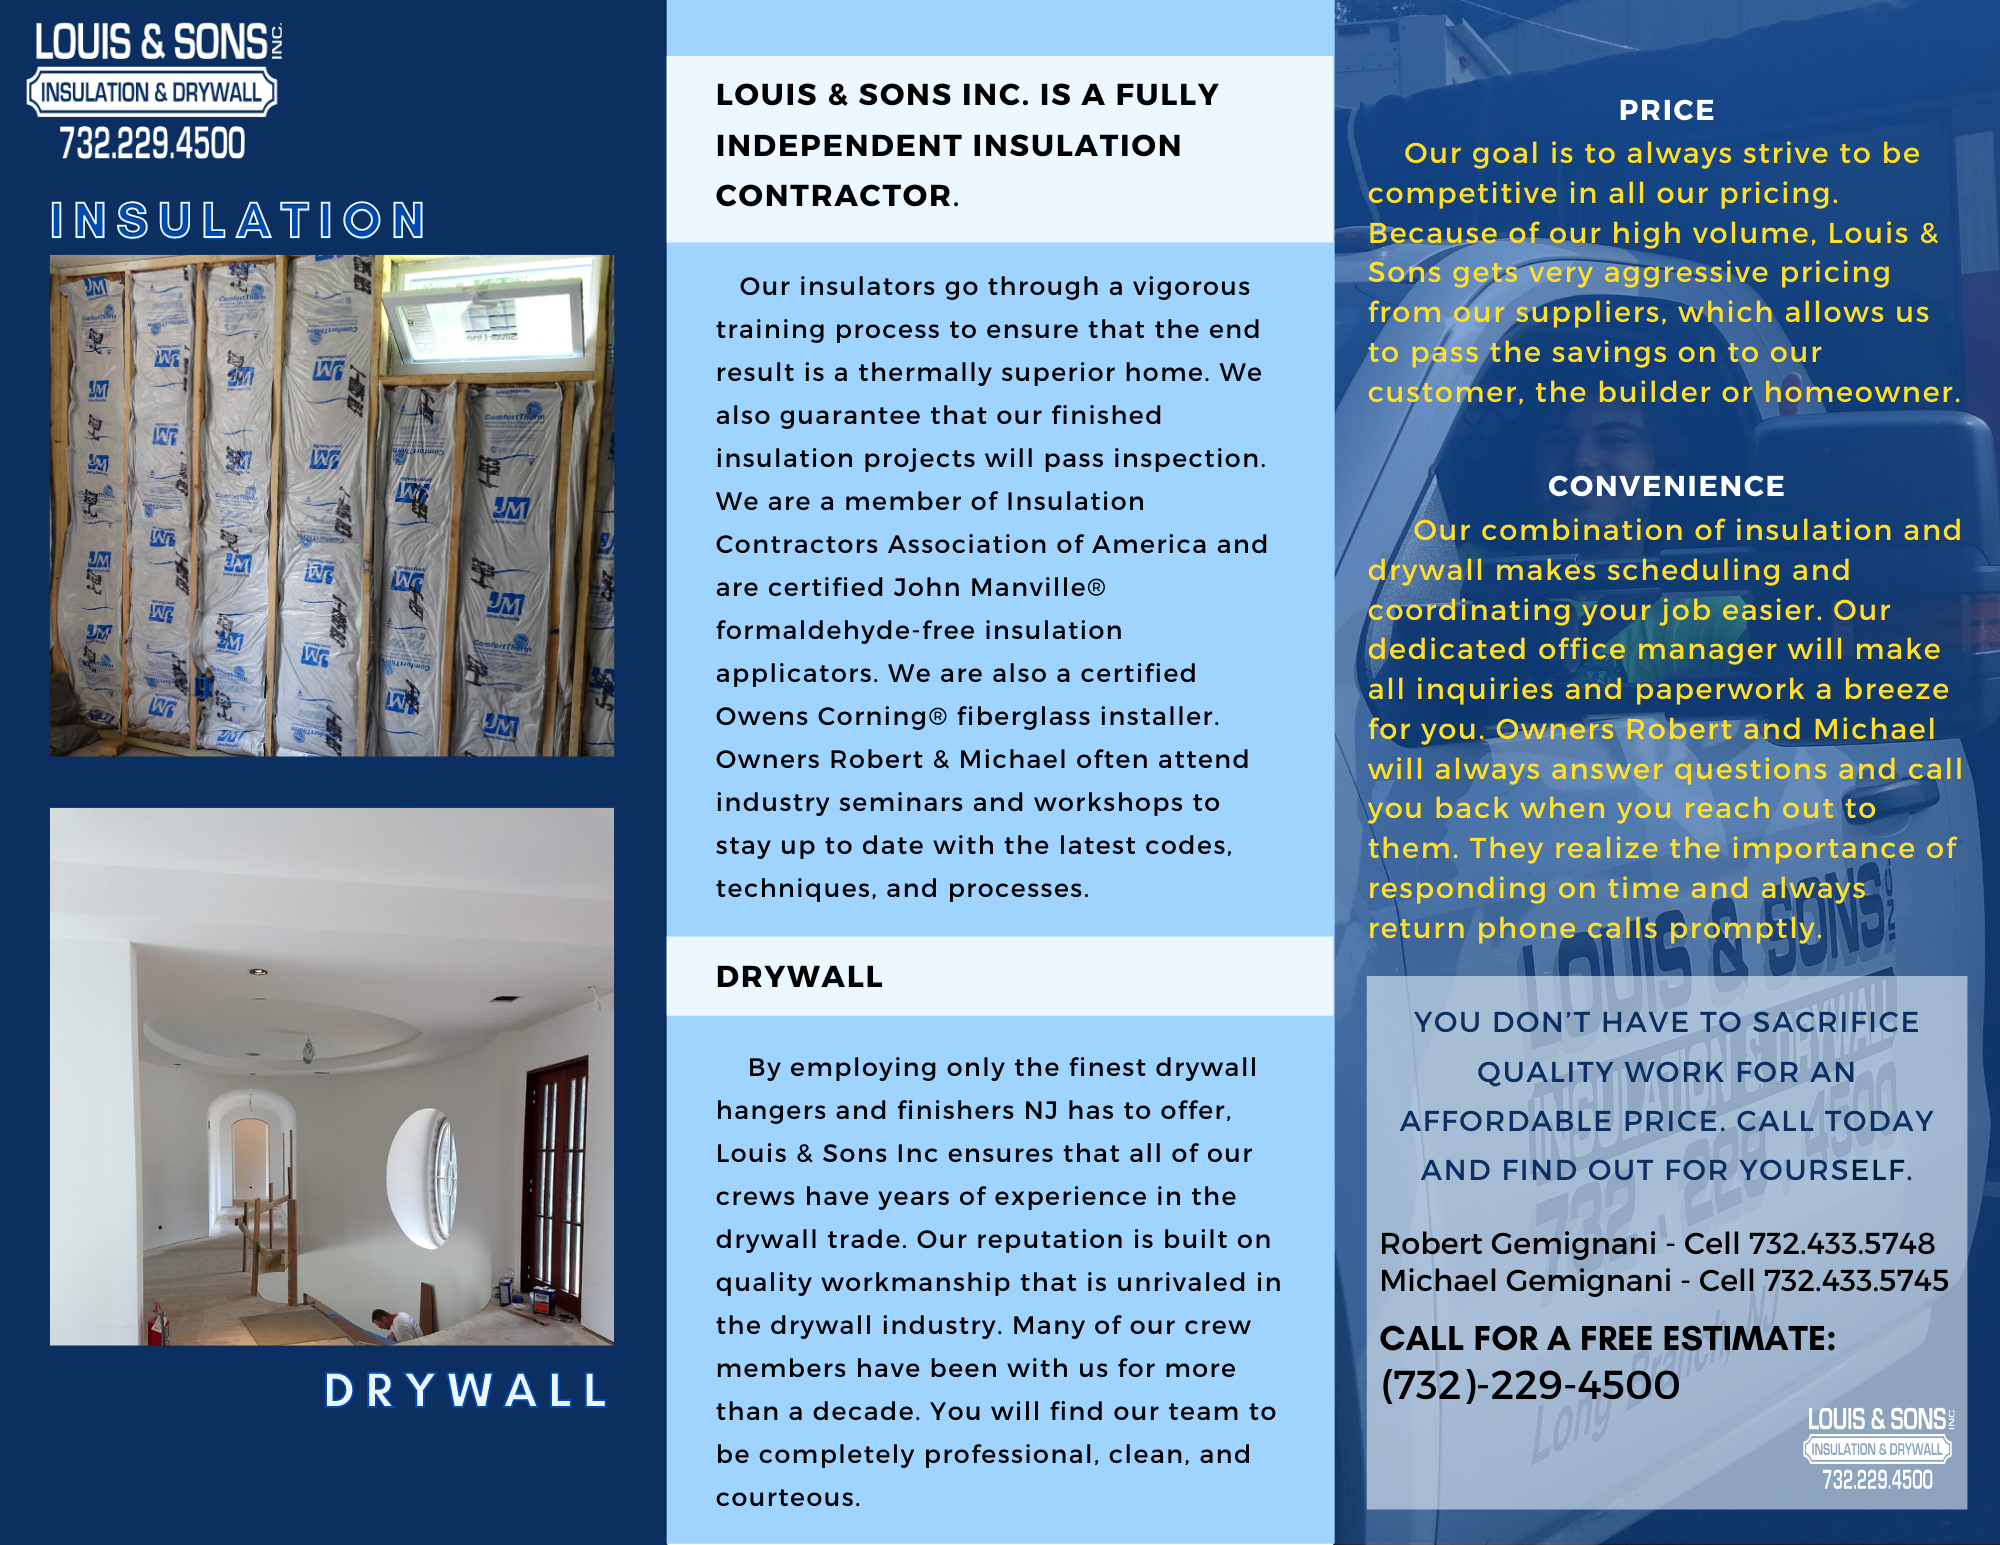 Trifold – Louis & Sons Drywall, Inc.